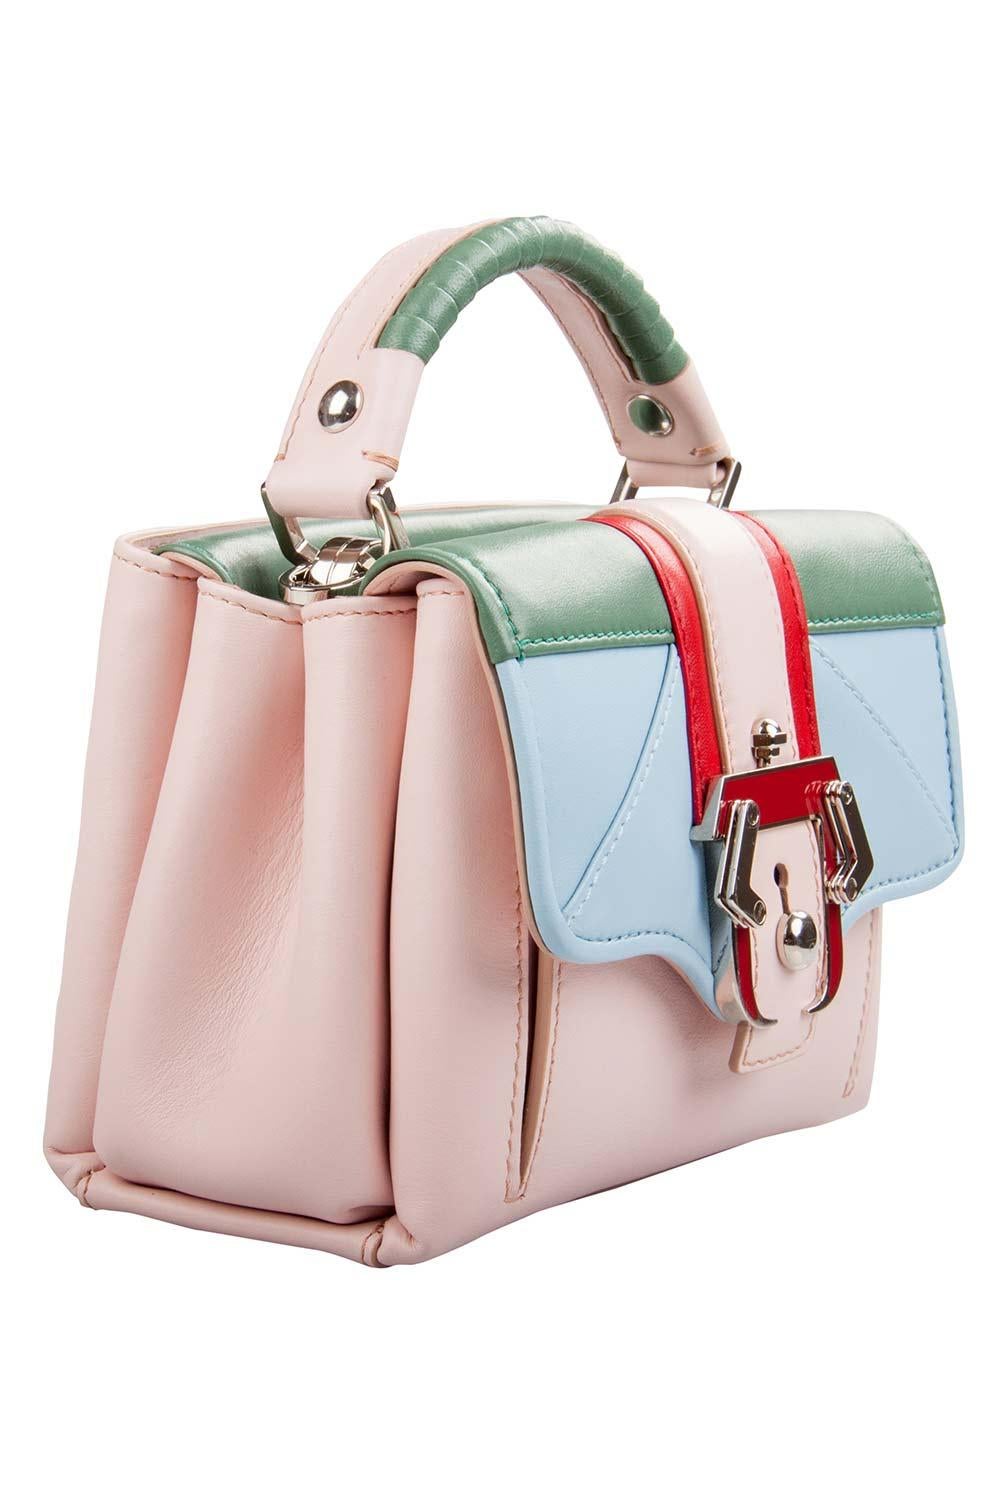 This Paula Cademartori beauty arrives in a gorgeous shape and design. It has a multicolored leather body, a top handle, and a flap to secure the satin interior. Overall, the bag looks ready to lift your effortless style.

